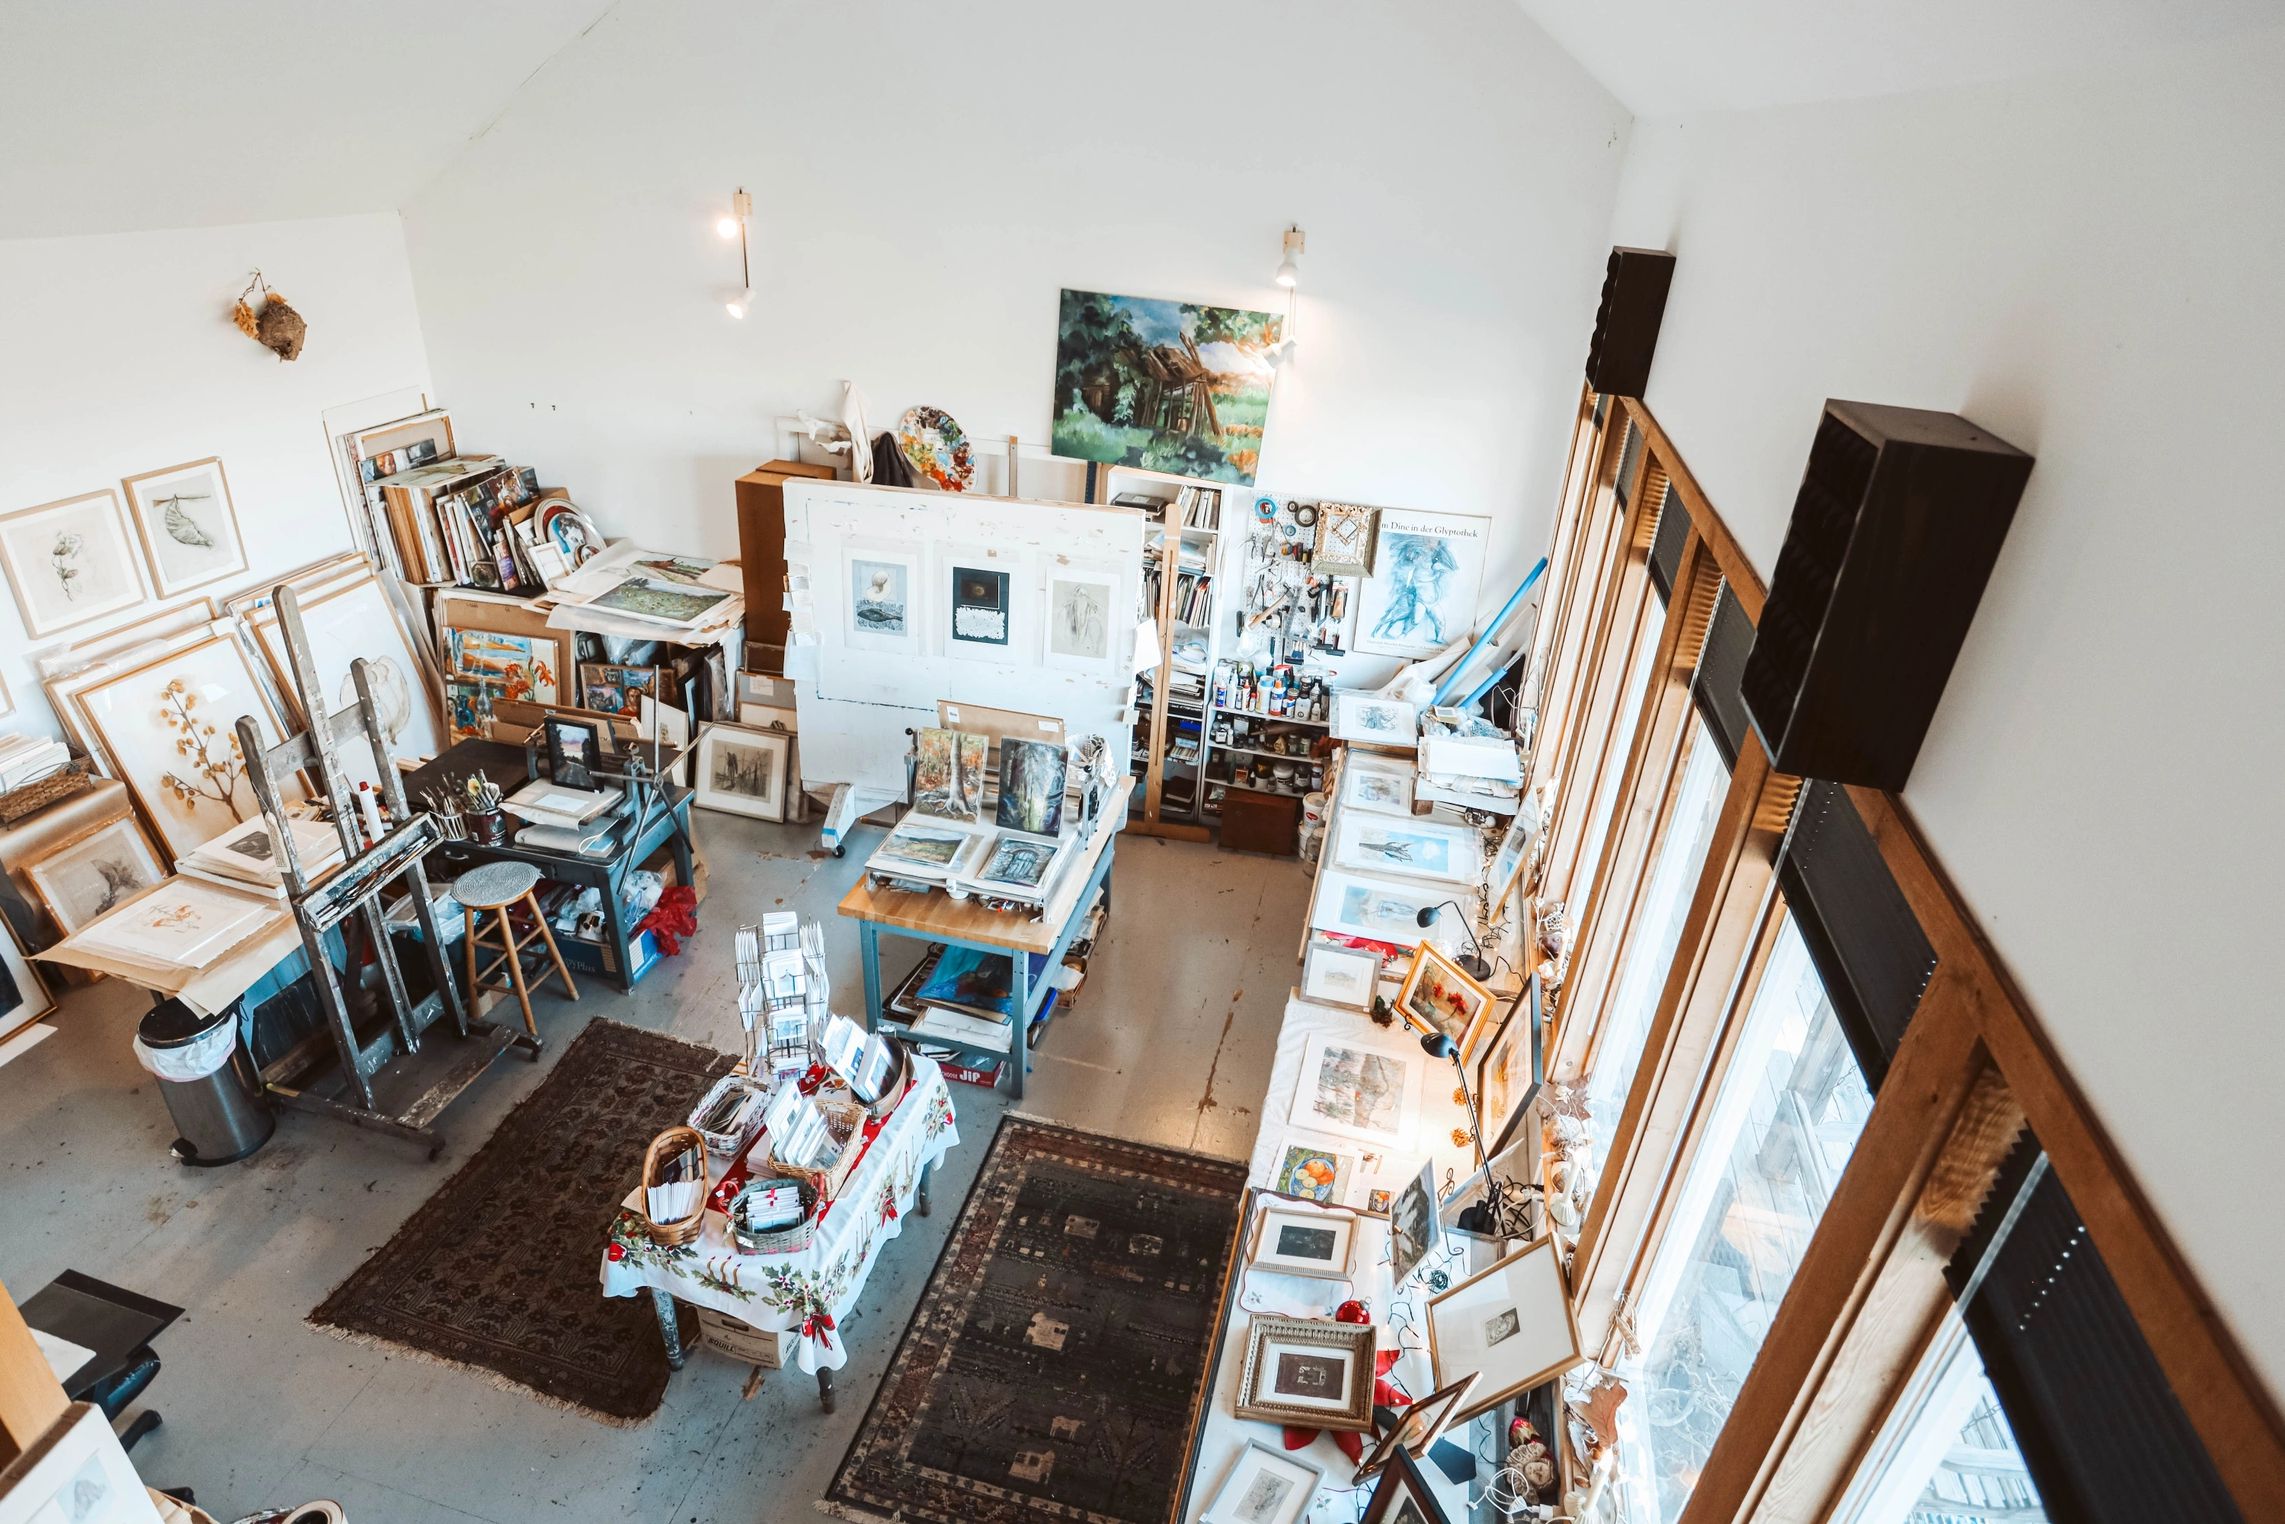 View of Sugarloaf Studio from the loft.
